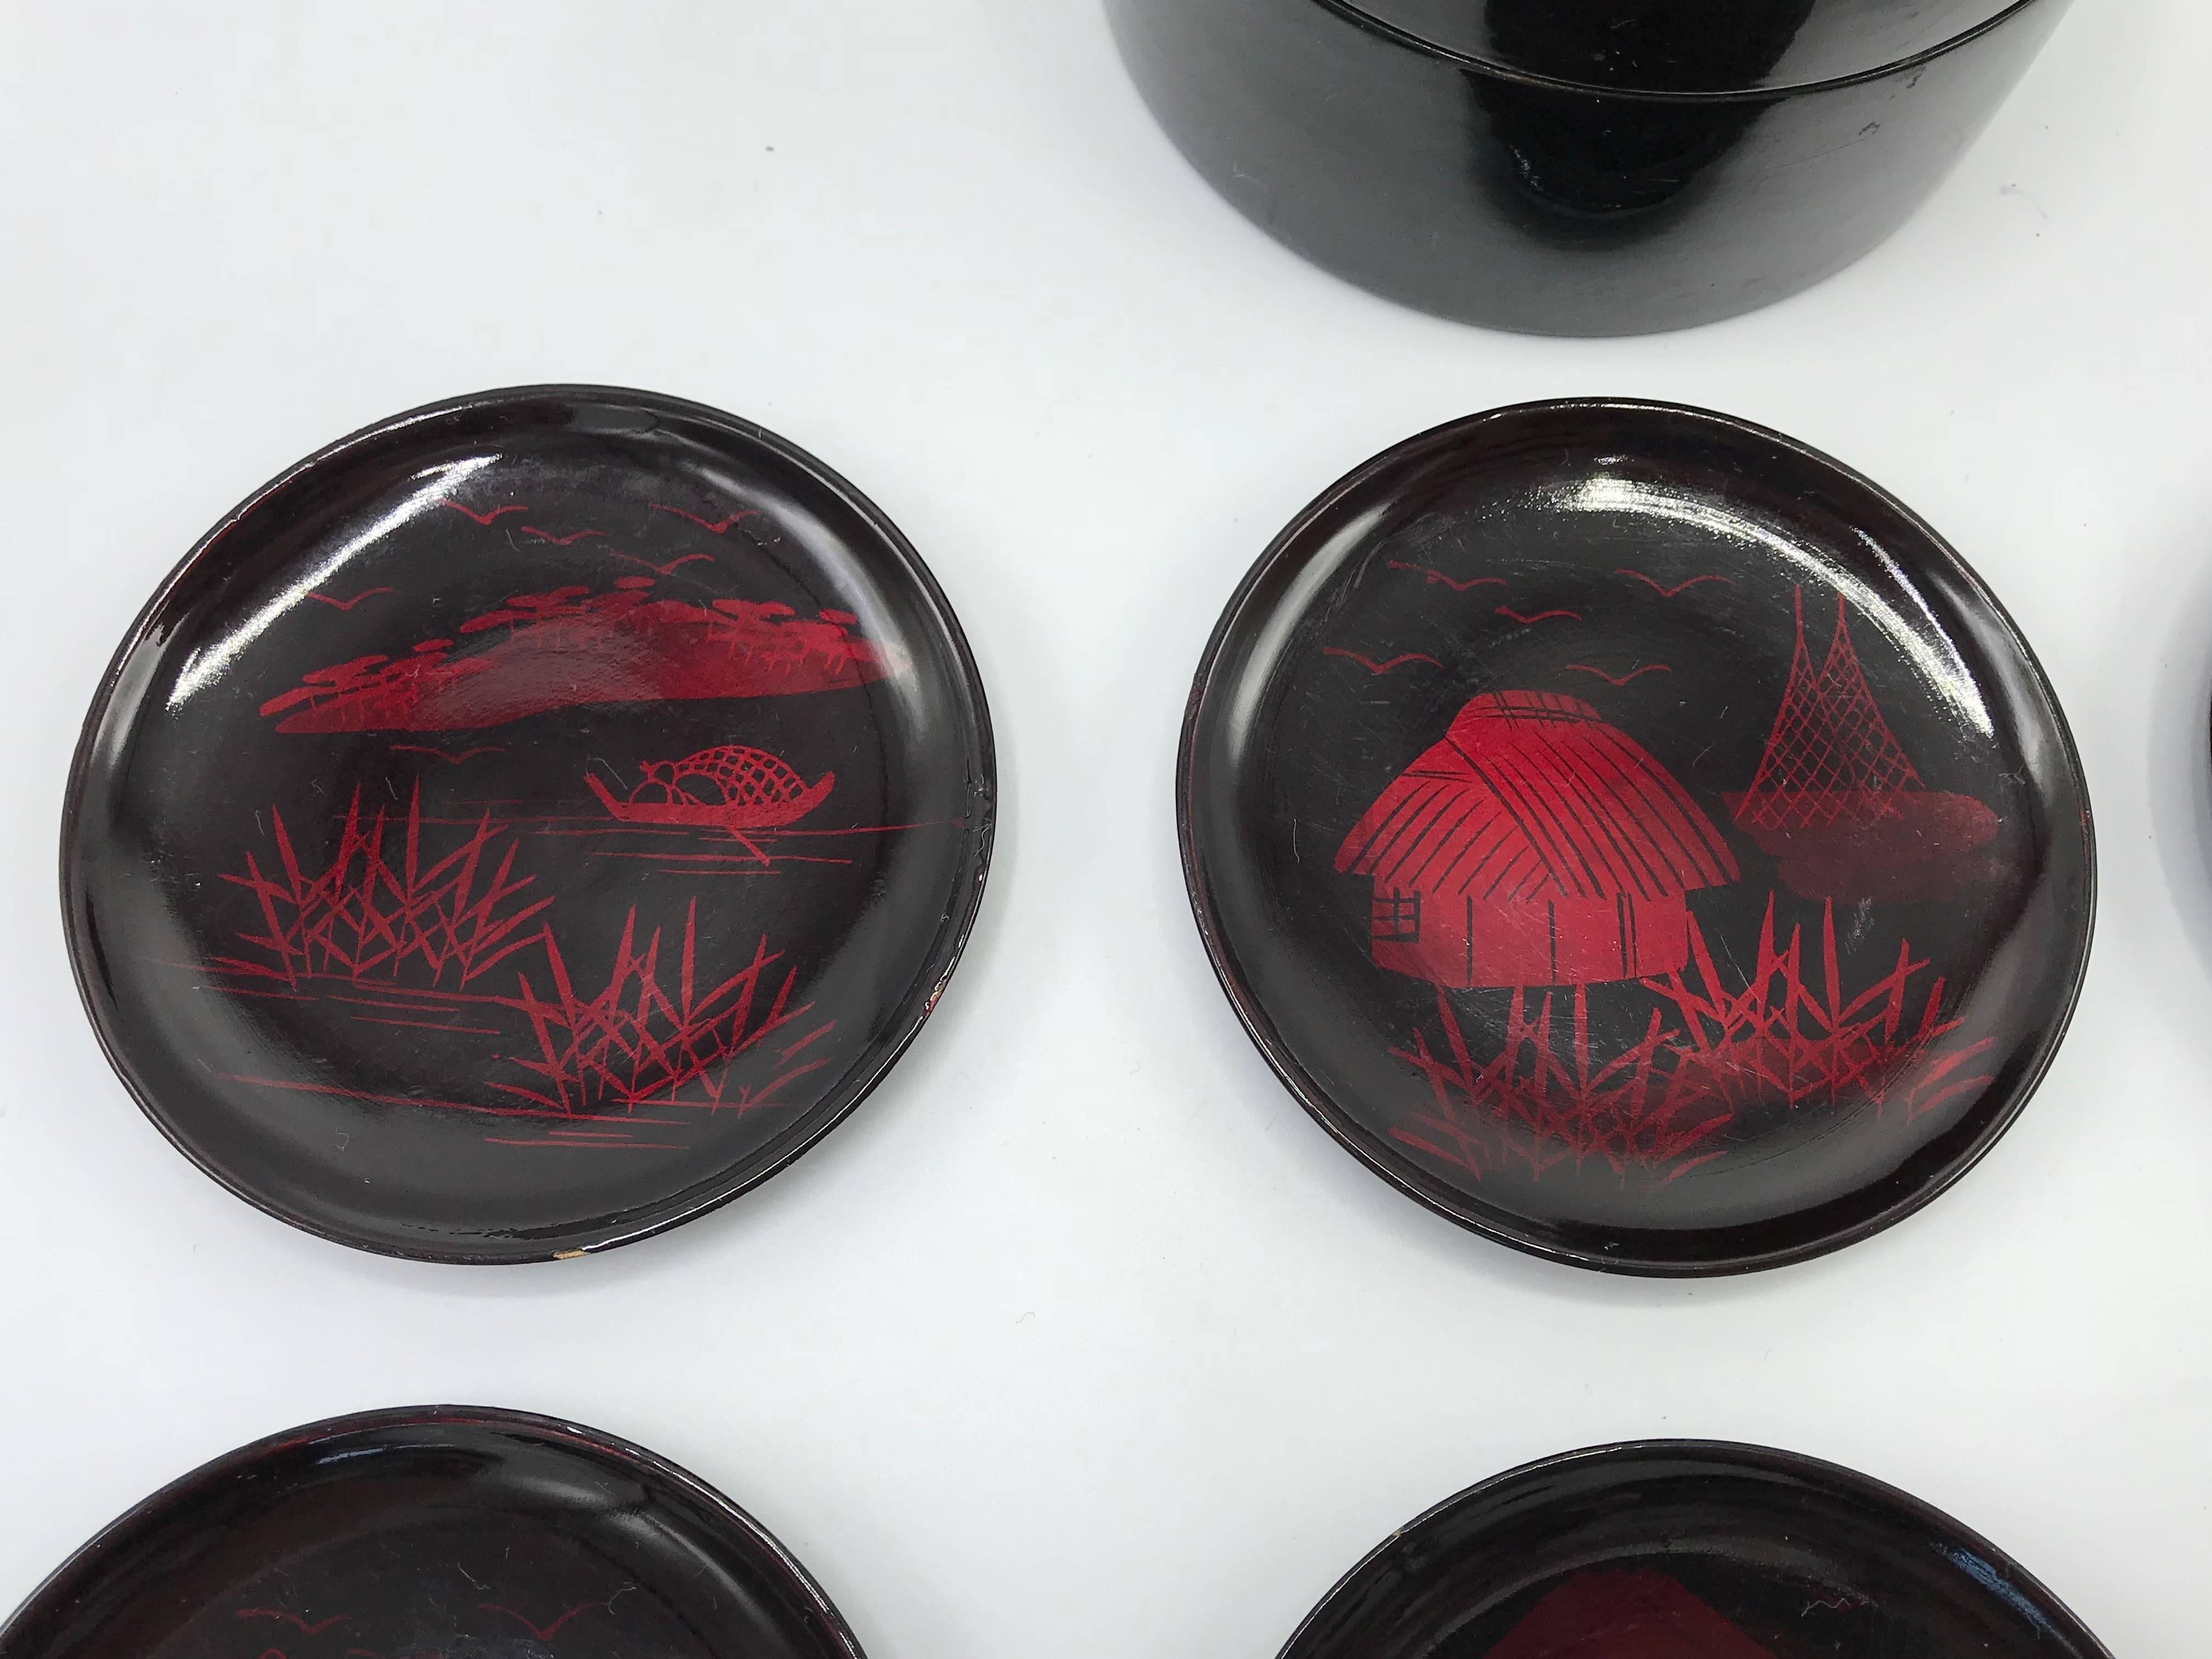 Offered is a beautiful, set of seven, 1960s Japanese lacquered red and black coasters. The set includes; six coasters and one box. Each coaster has a different ornate pagoda scene. 

Box: 3.75